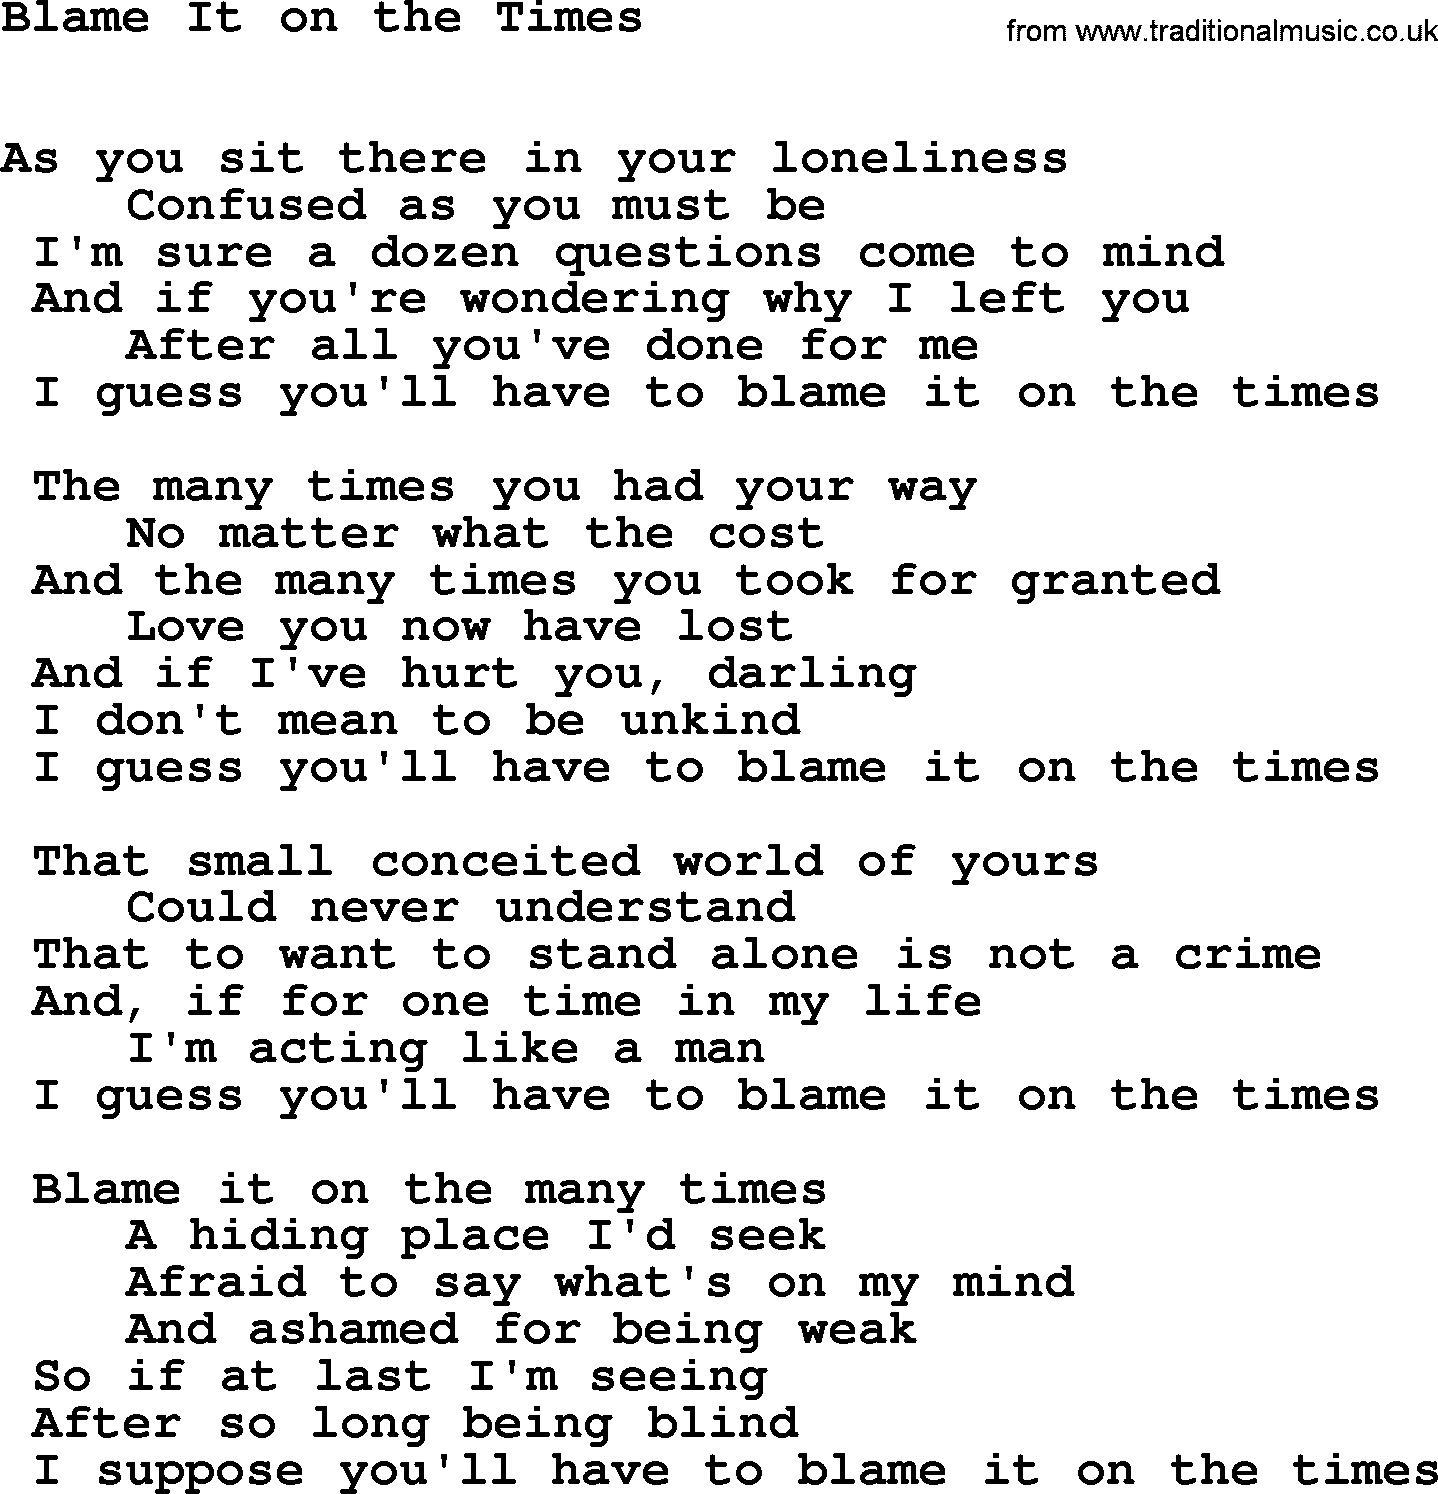 Willie Nelson song: Blame It on the Times lyrics